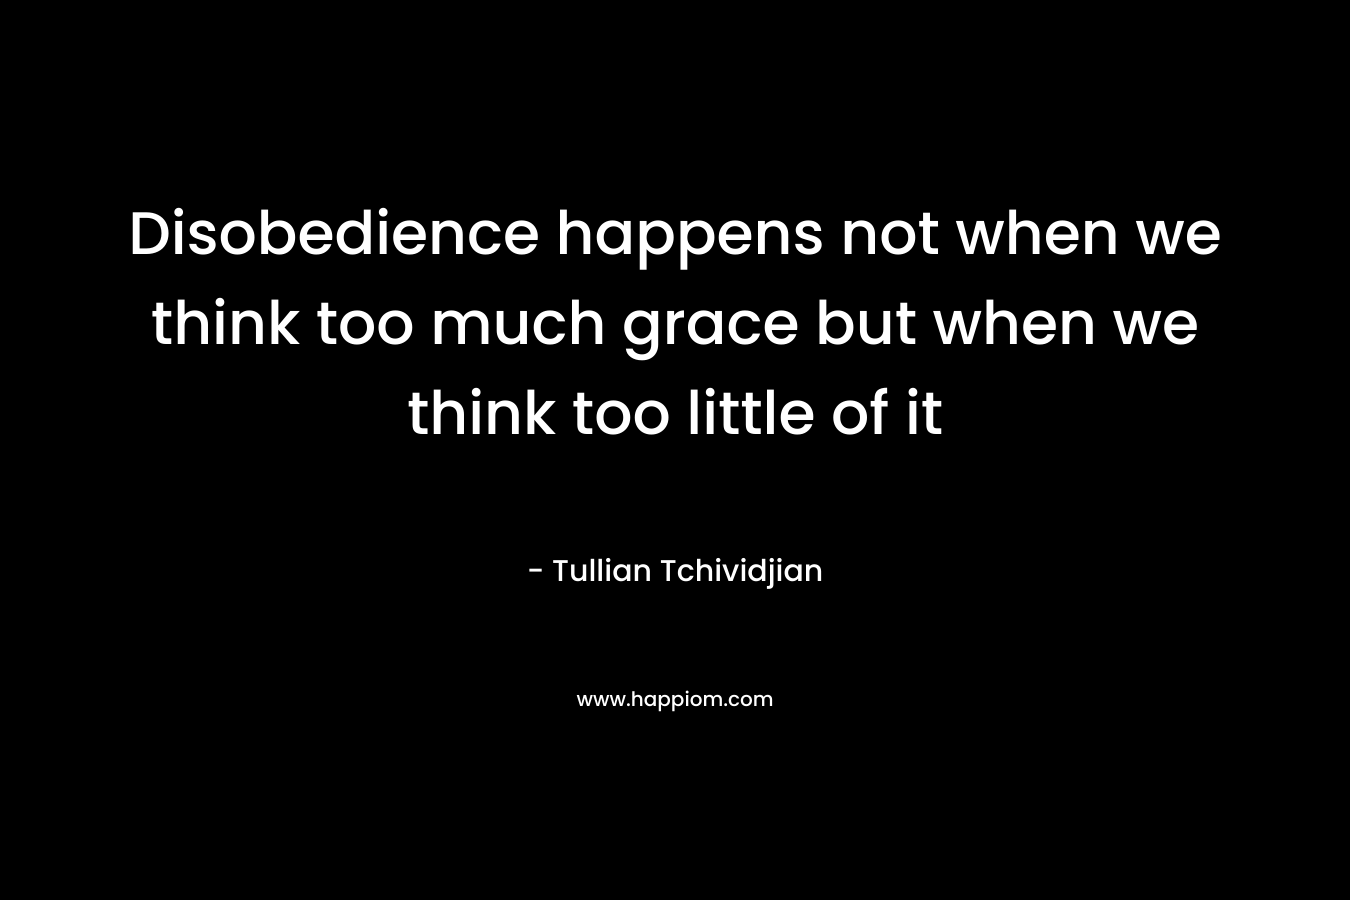 Disobedience happens not when we think too much grace but when we think too little of it